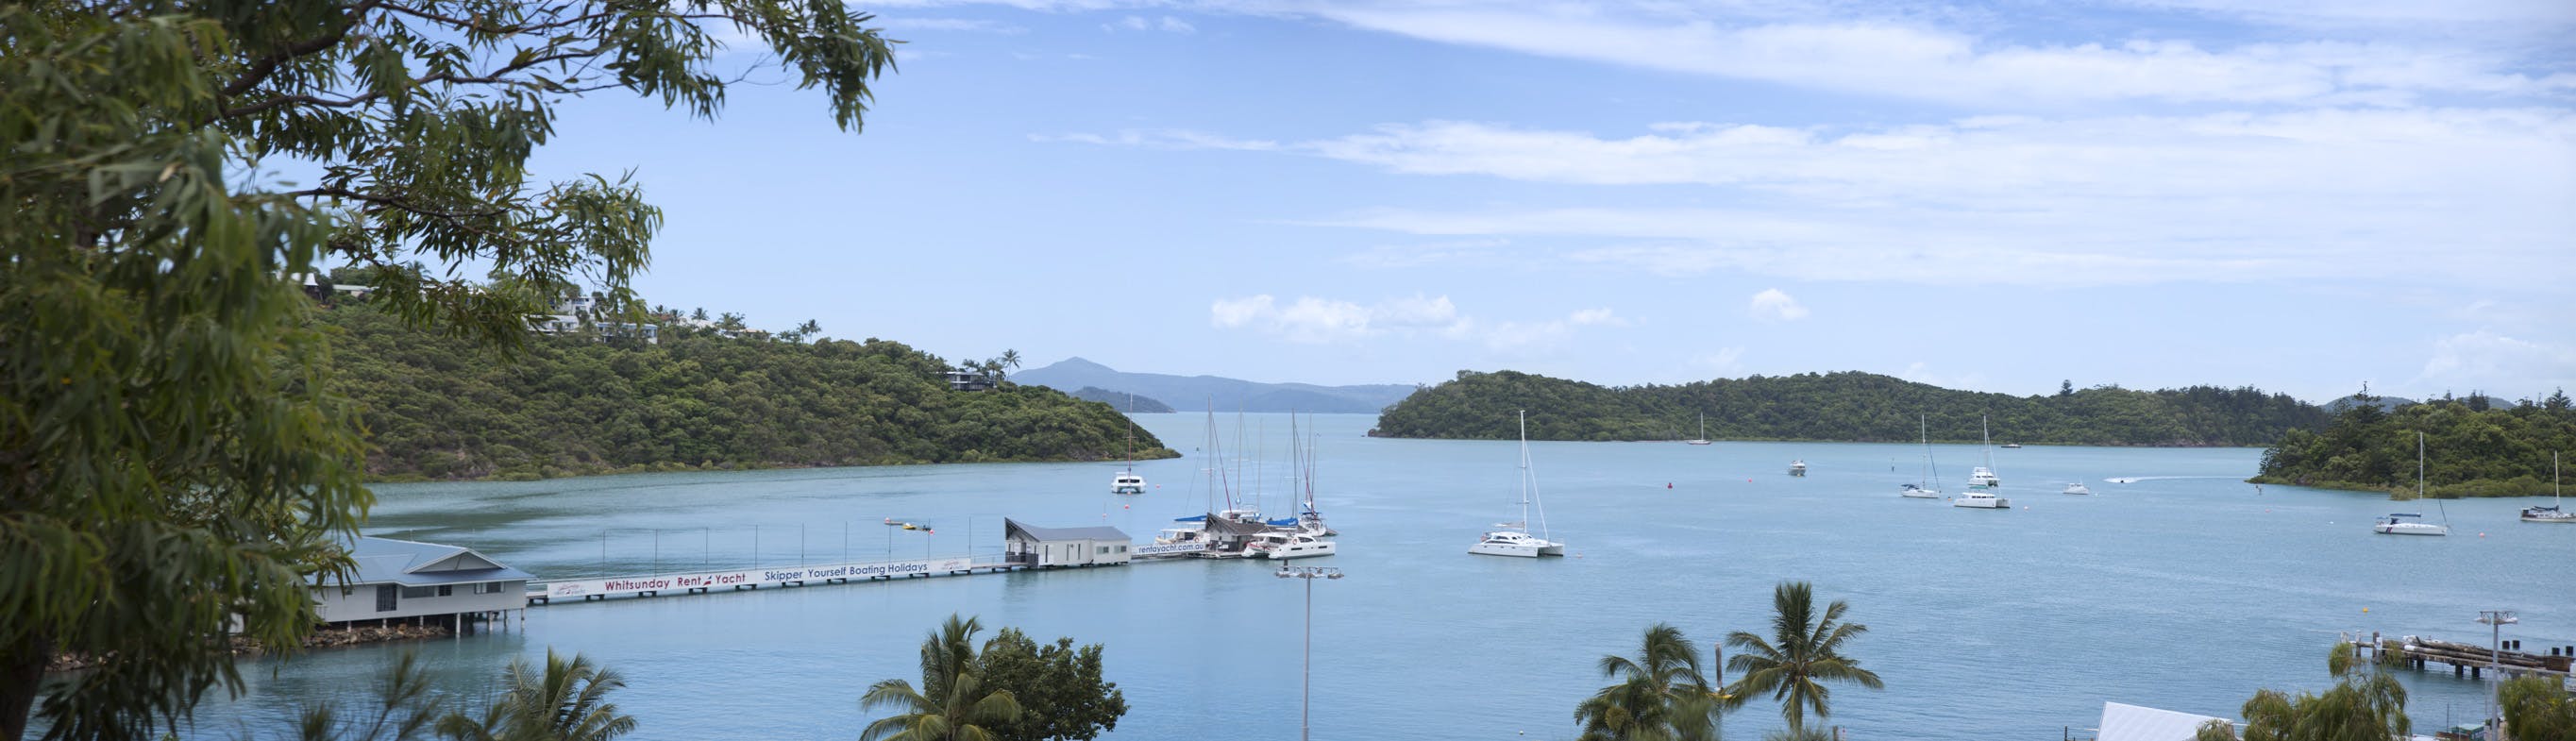 Shute Harbour - view from lookout